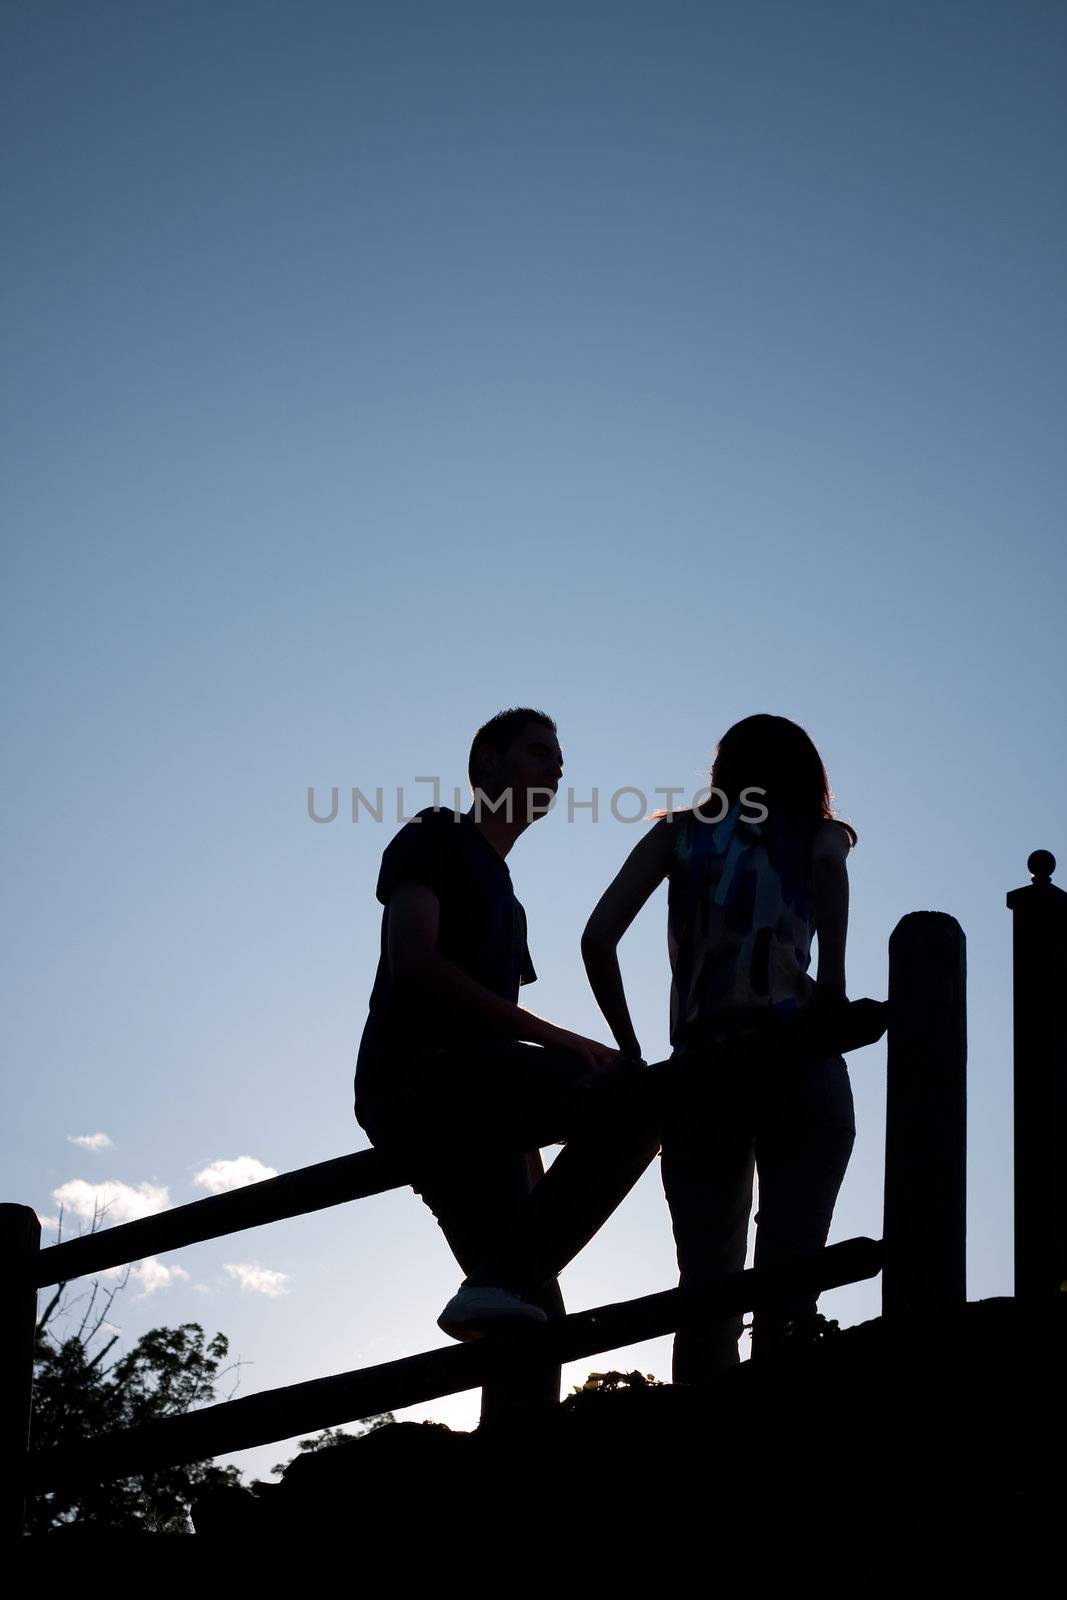 Silhouette of a young couple hanging out together outdoors by an old country fence during the early evening hours.